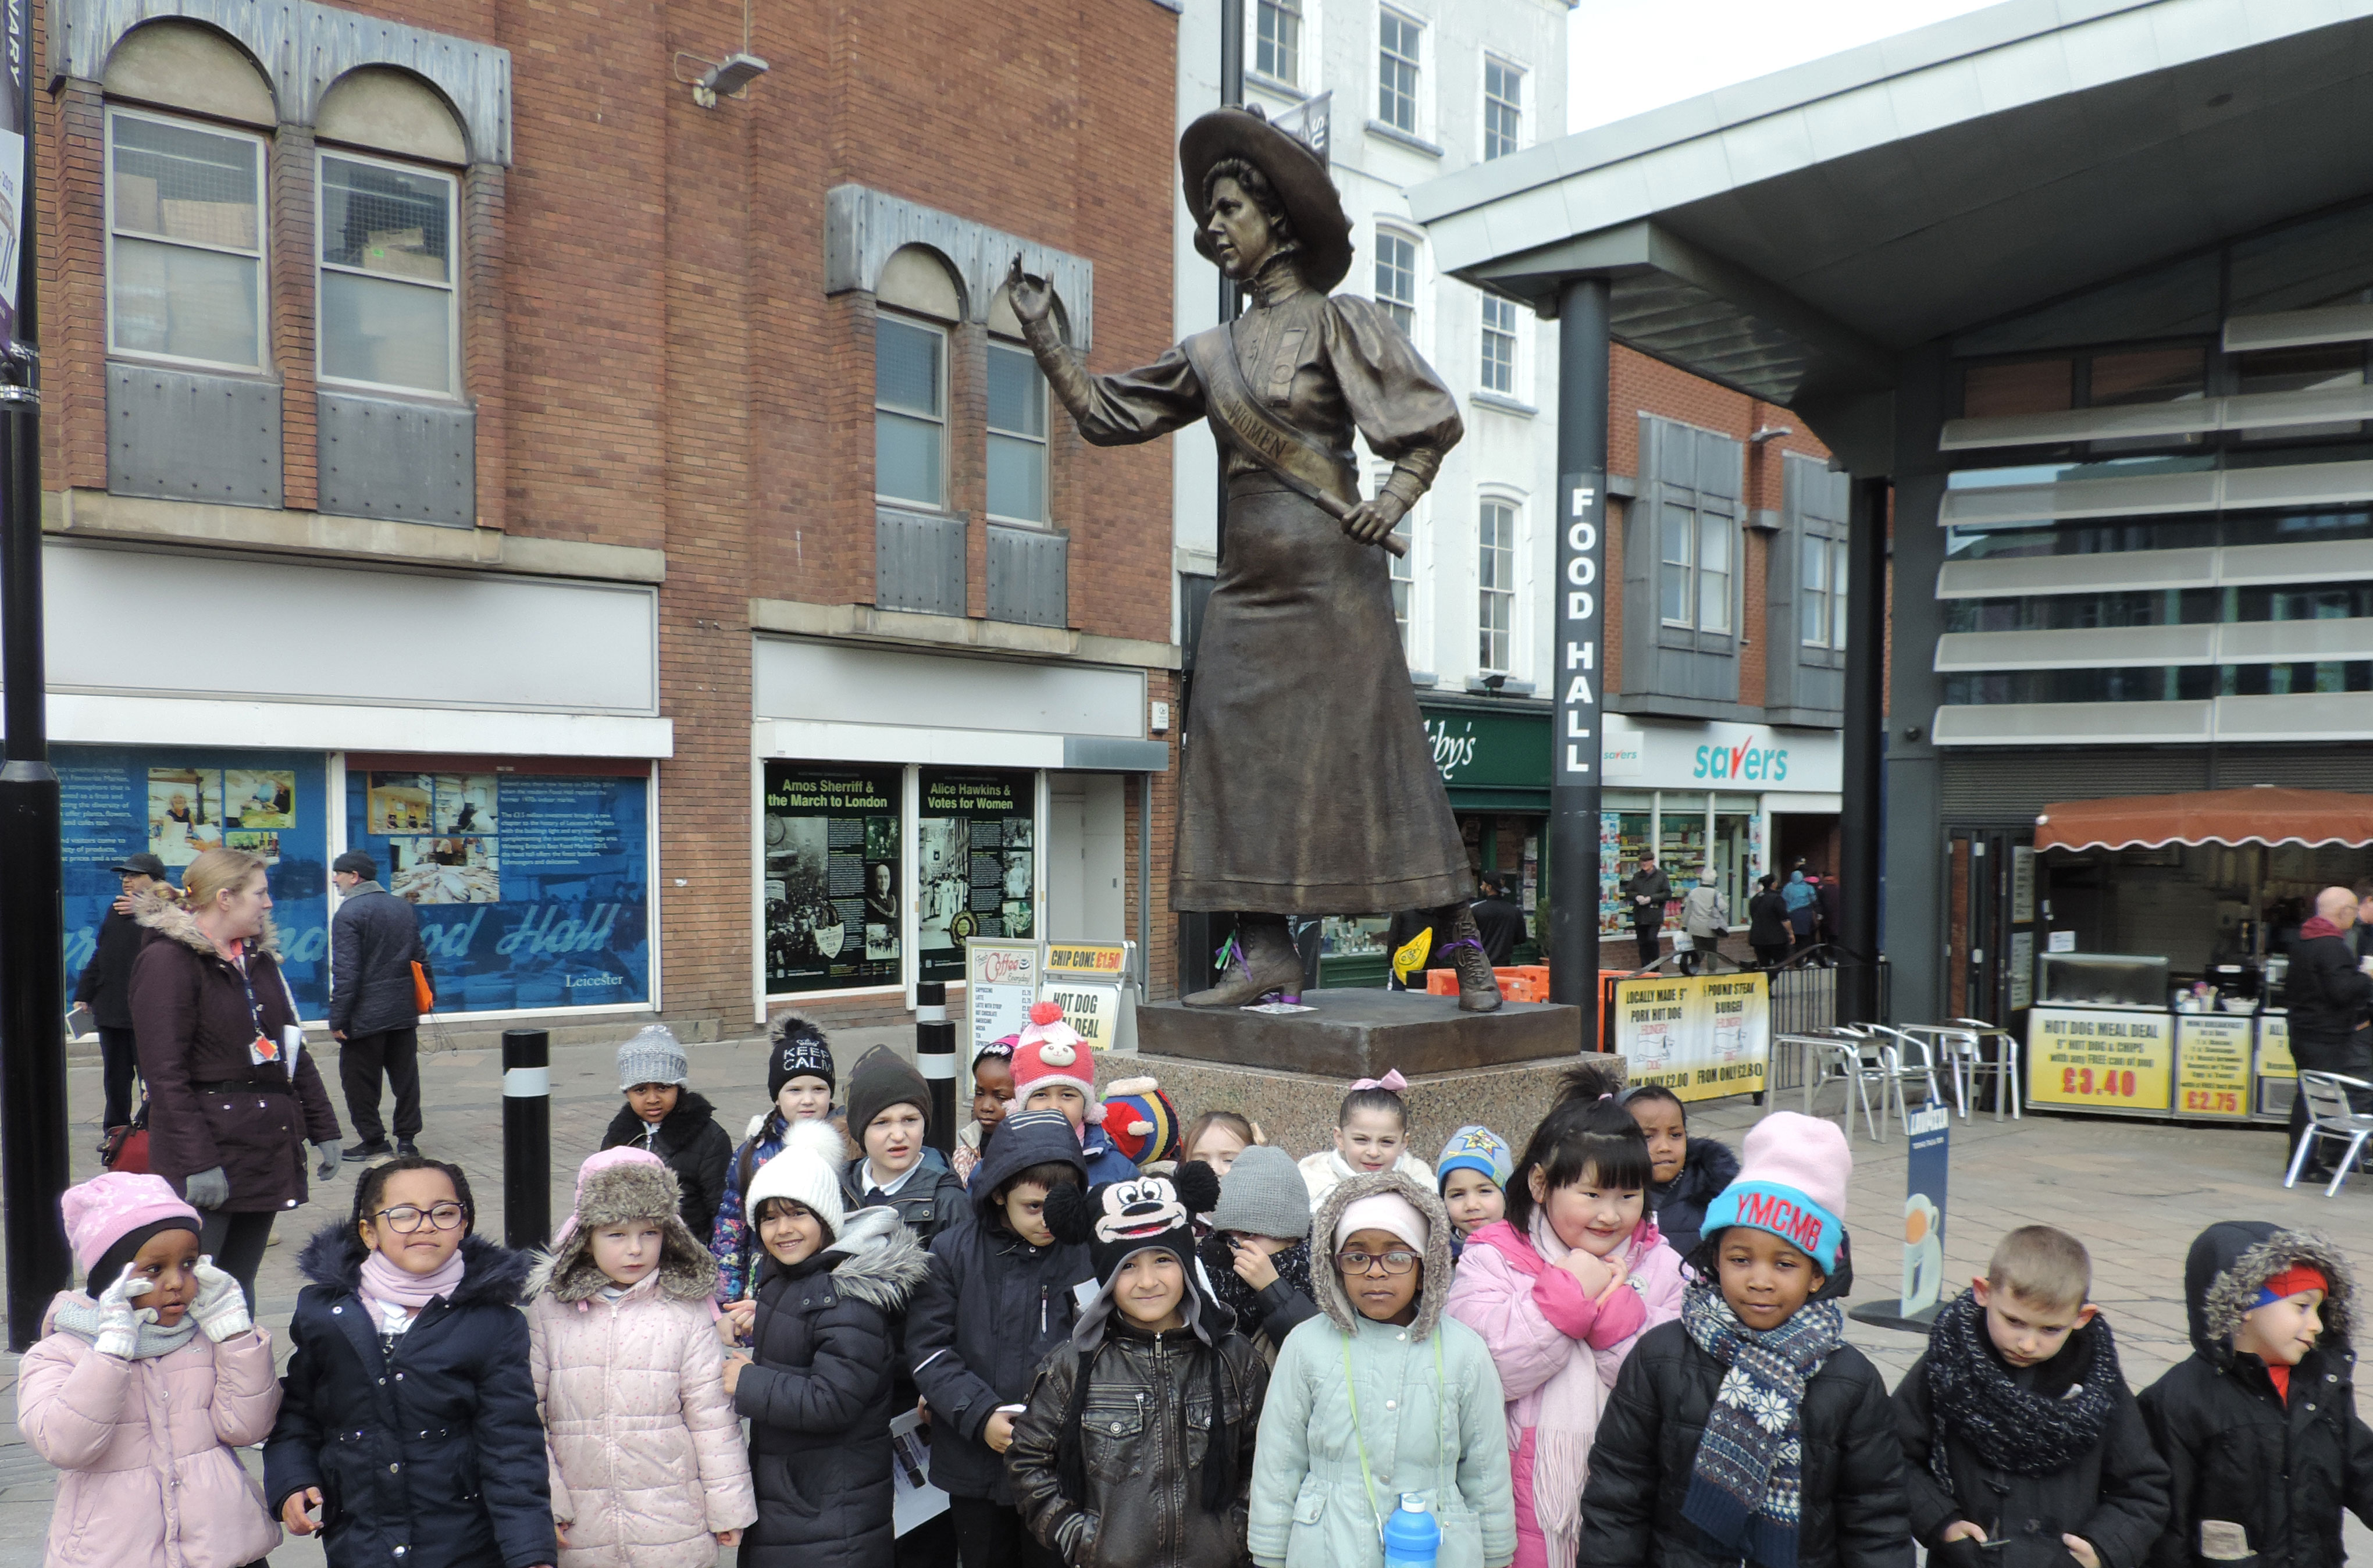 A group of about 20 Year 1 children posing for a group photo in front of Alice Hawkins statue in Leicester.